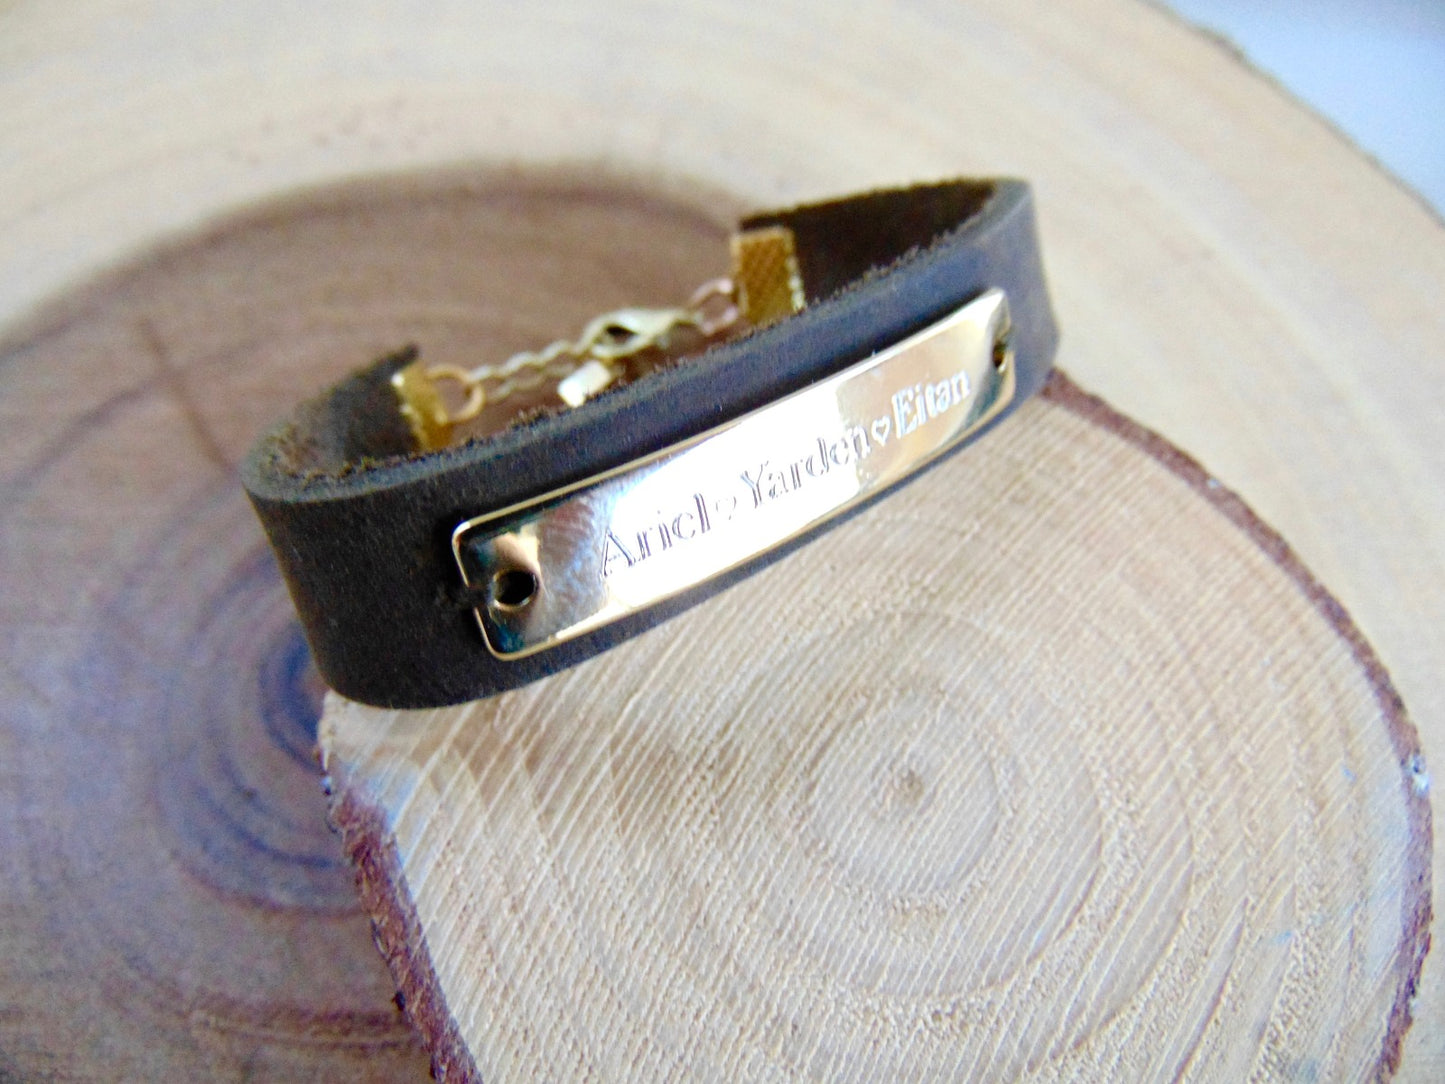 Customized engraving on rose gold cuff bracelet with black/brown leather